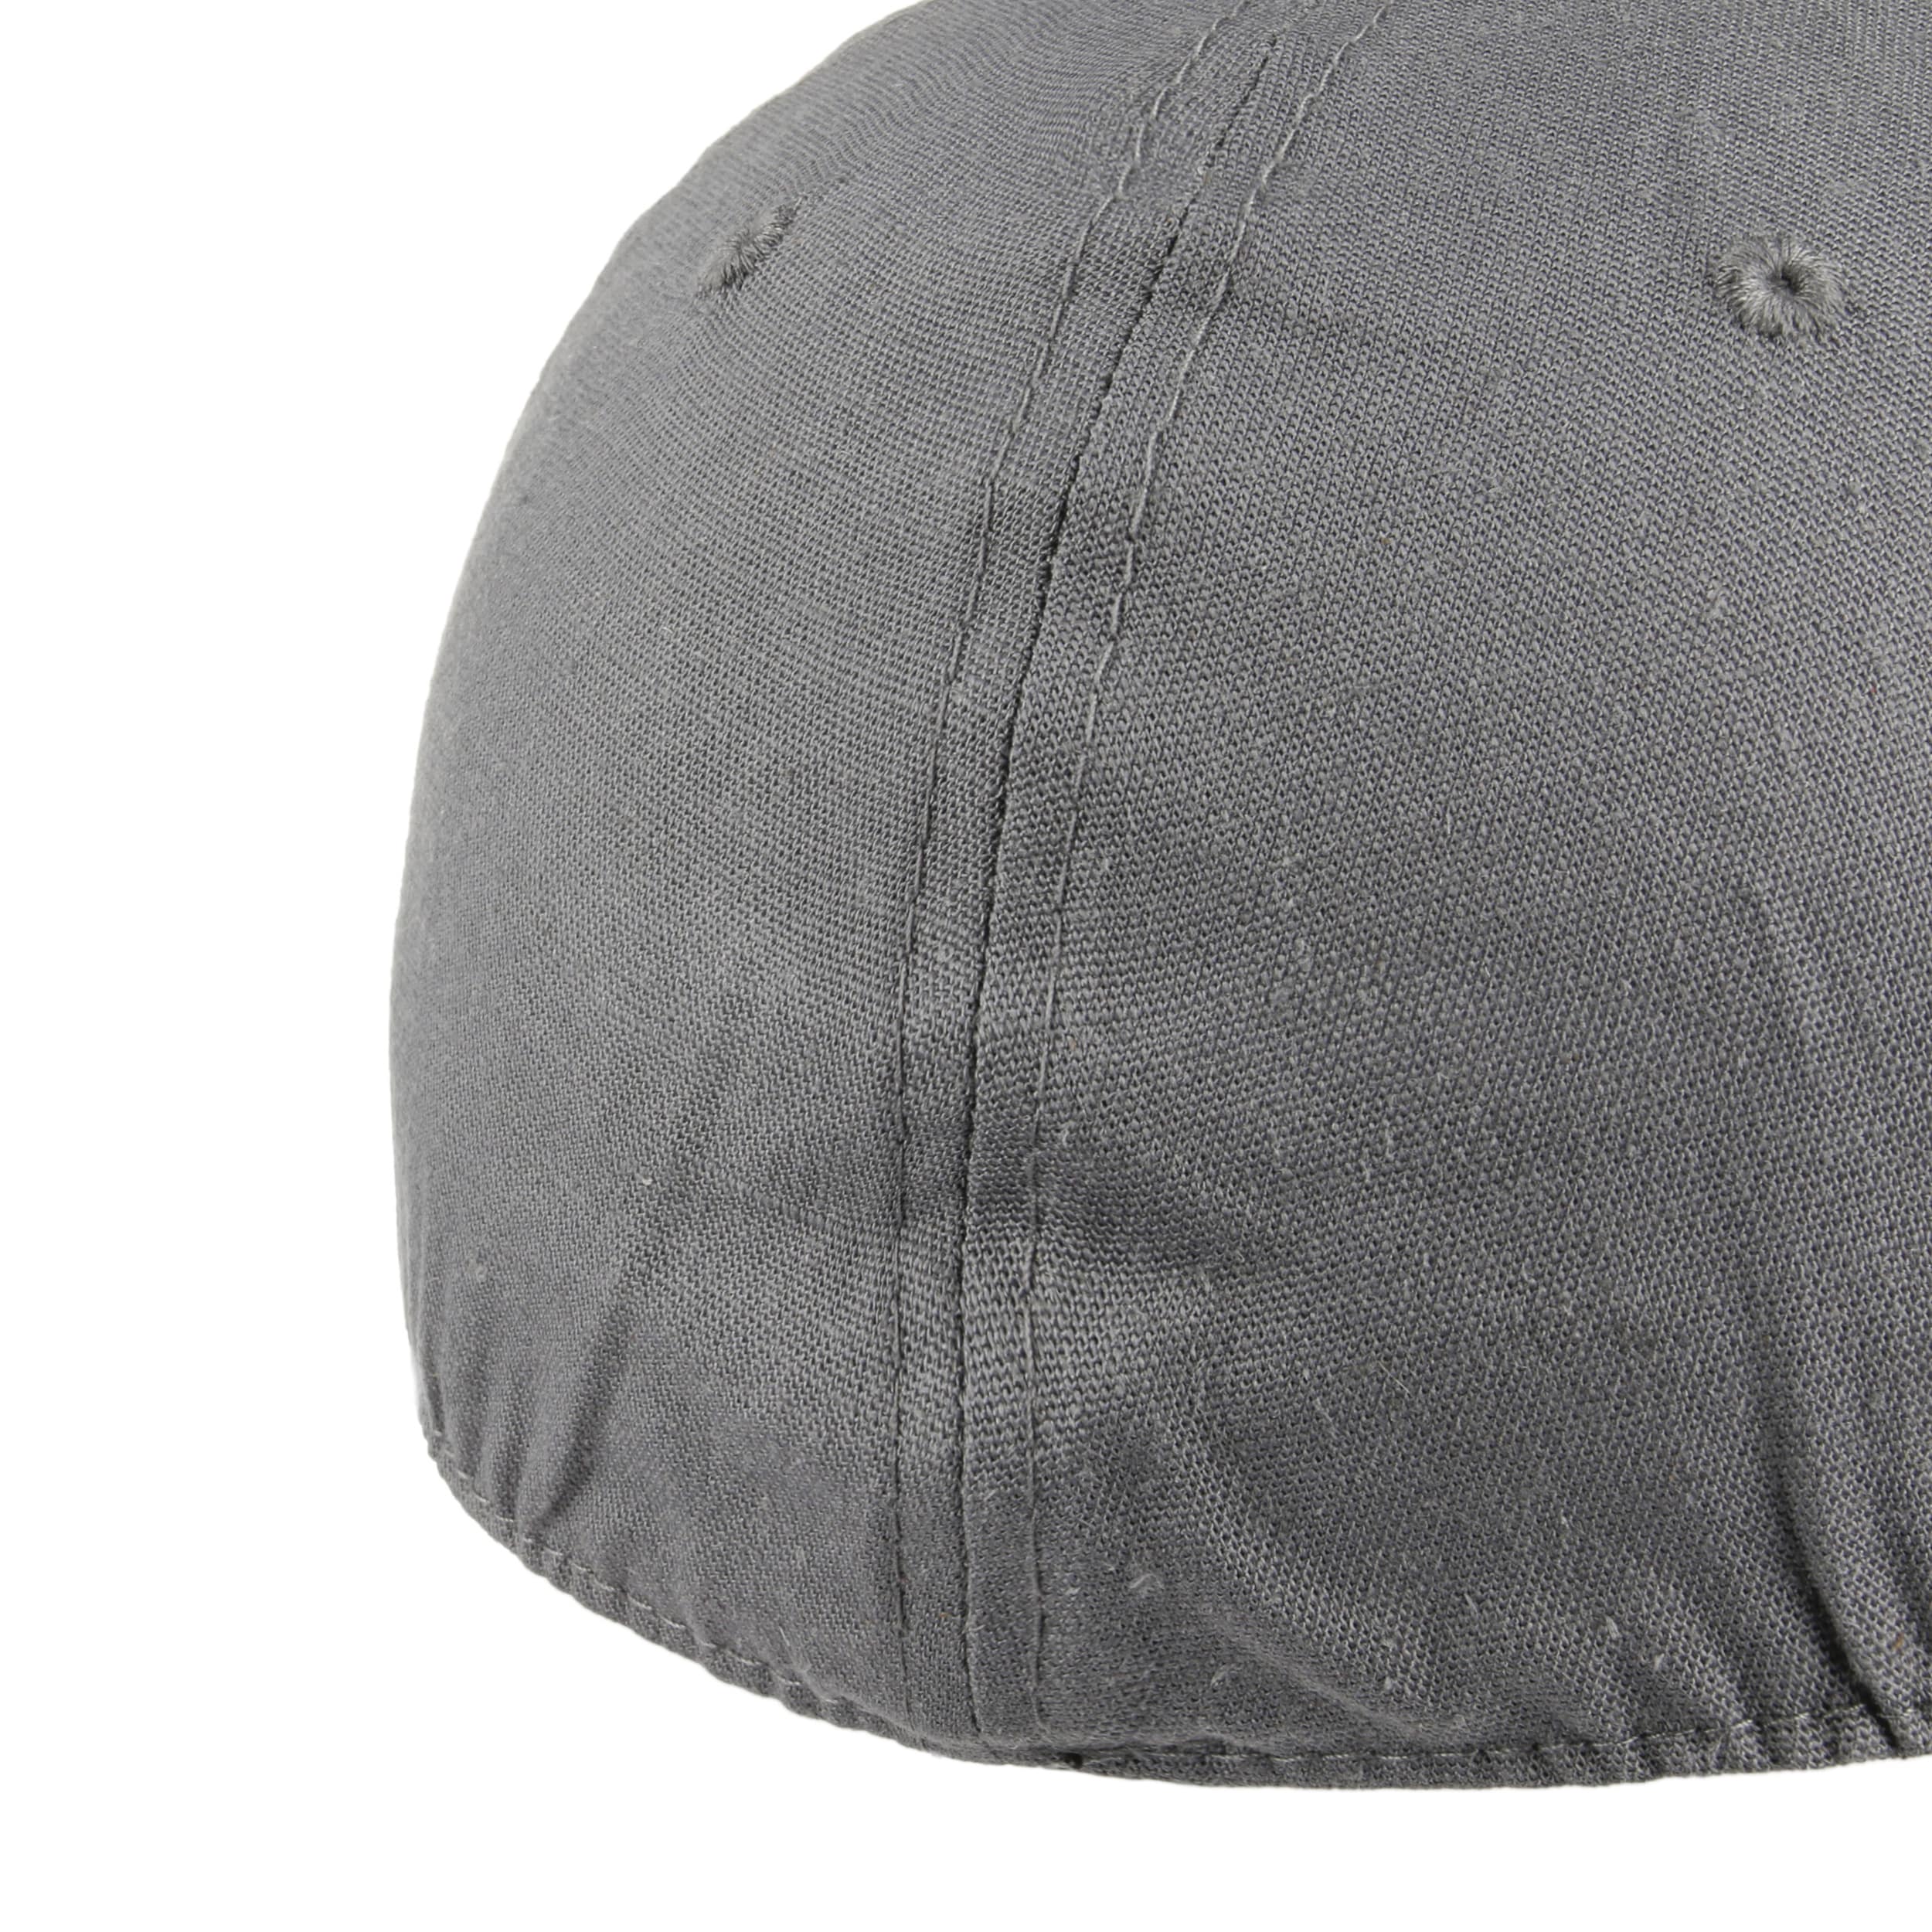 Sao Paolo Linen Cap - € 26,95 by Chillouts